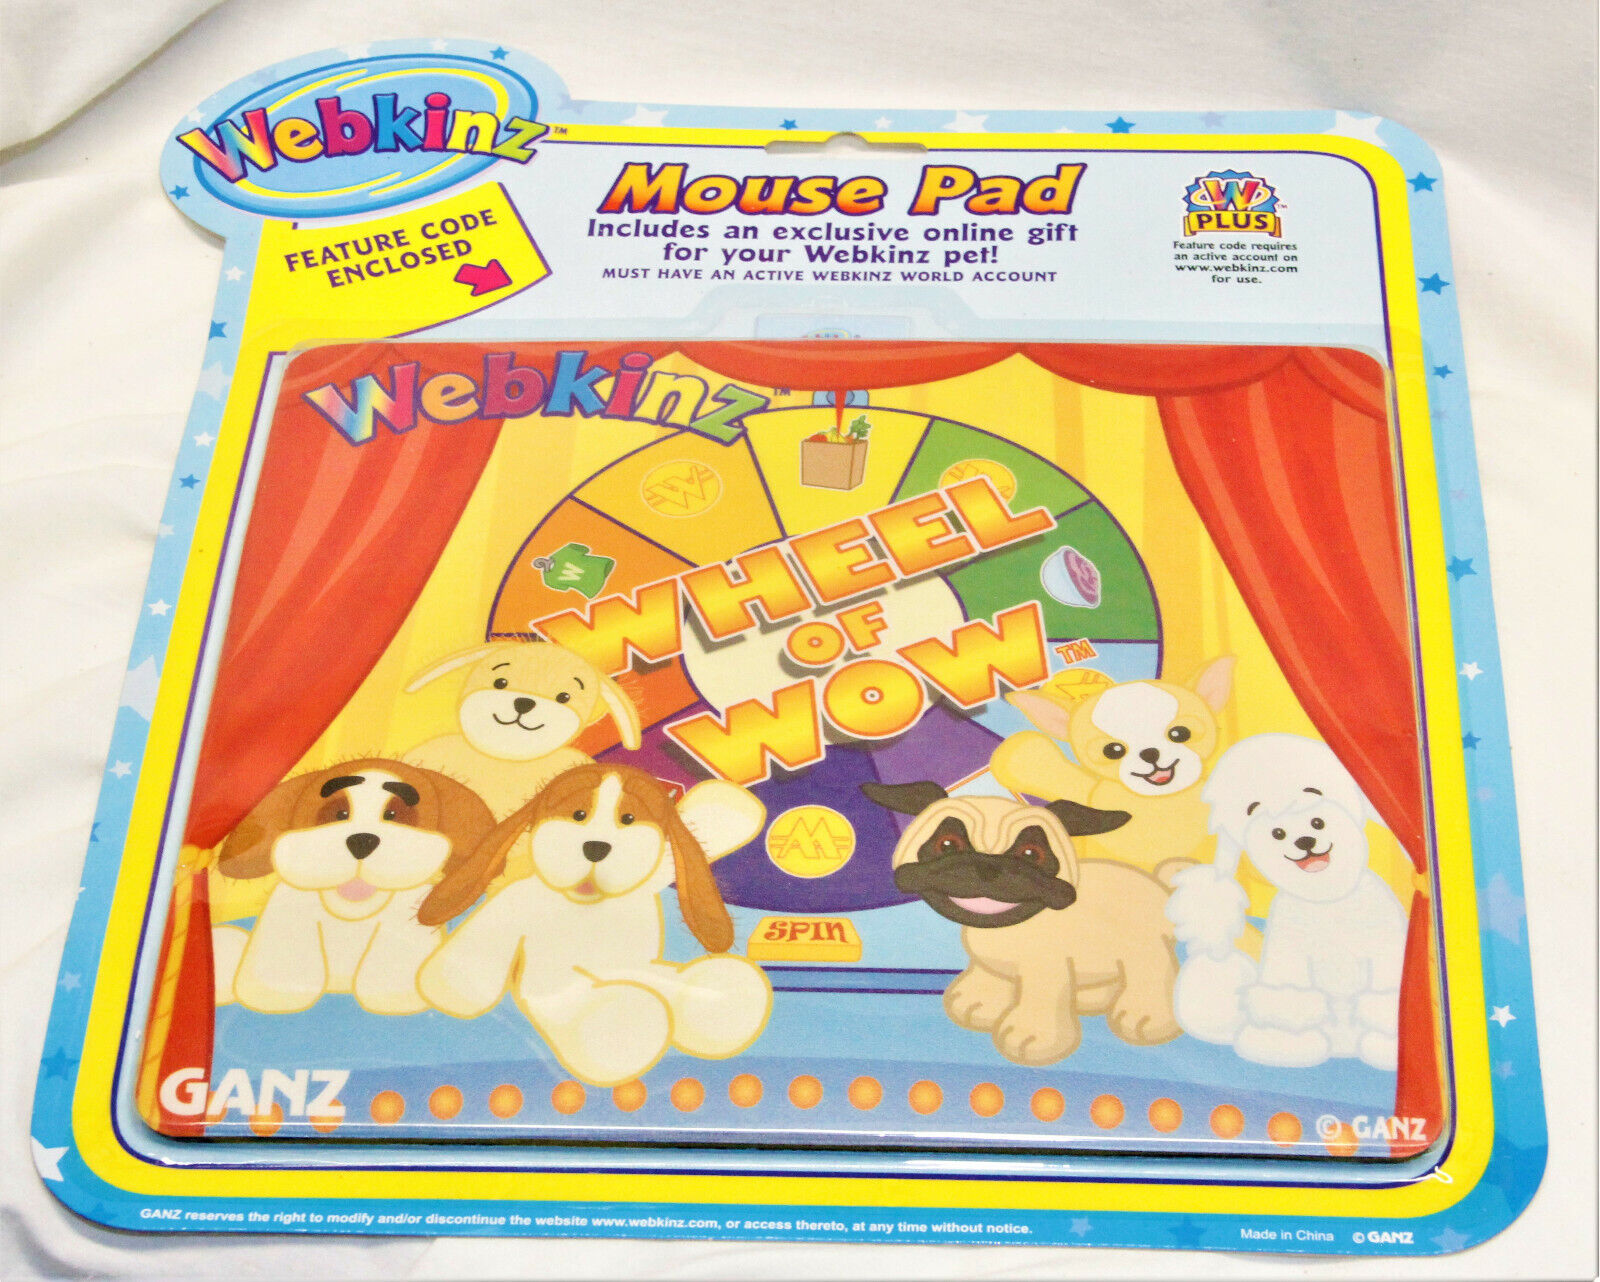 Webkinz Wheel of Wow Mouse Pad with Code Unopened New Package  - FREE SHIPPING